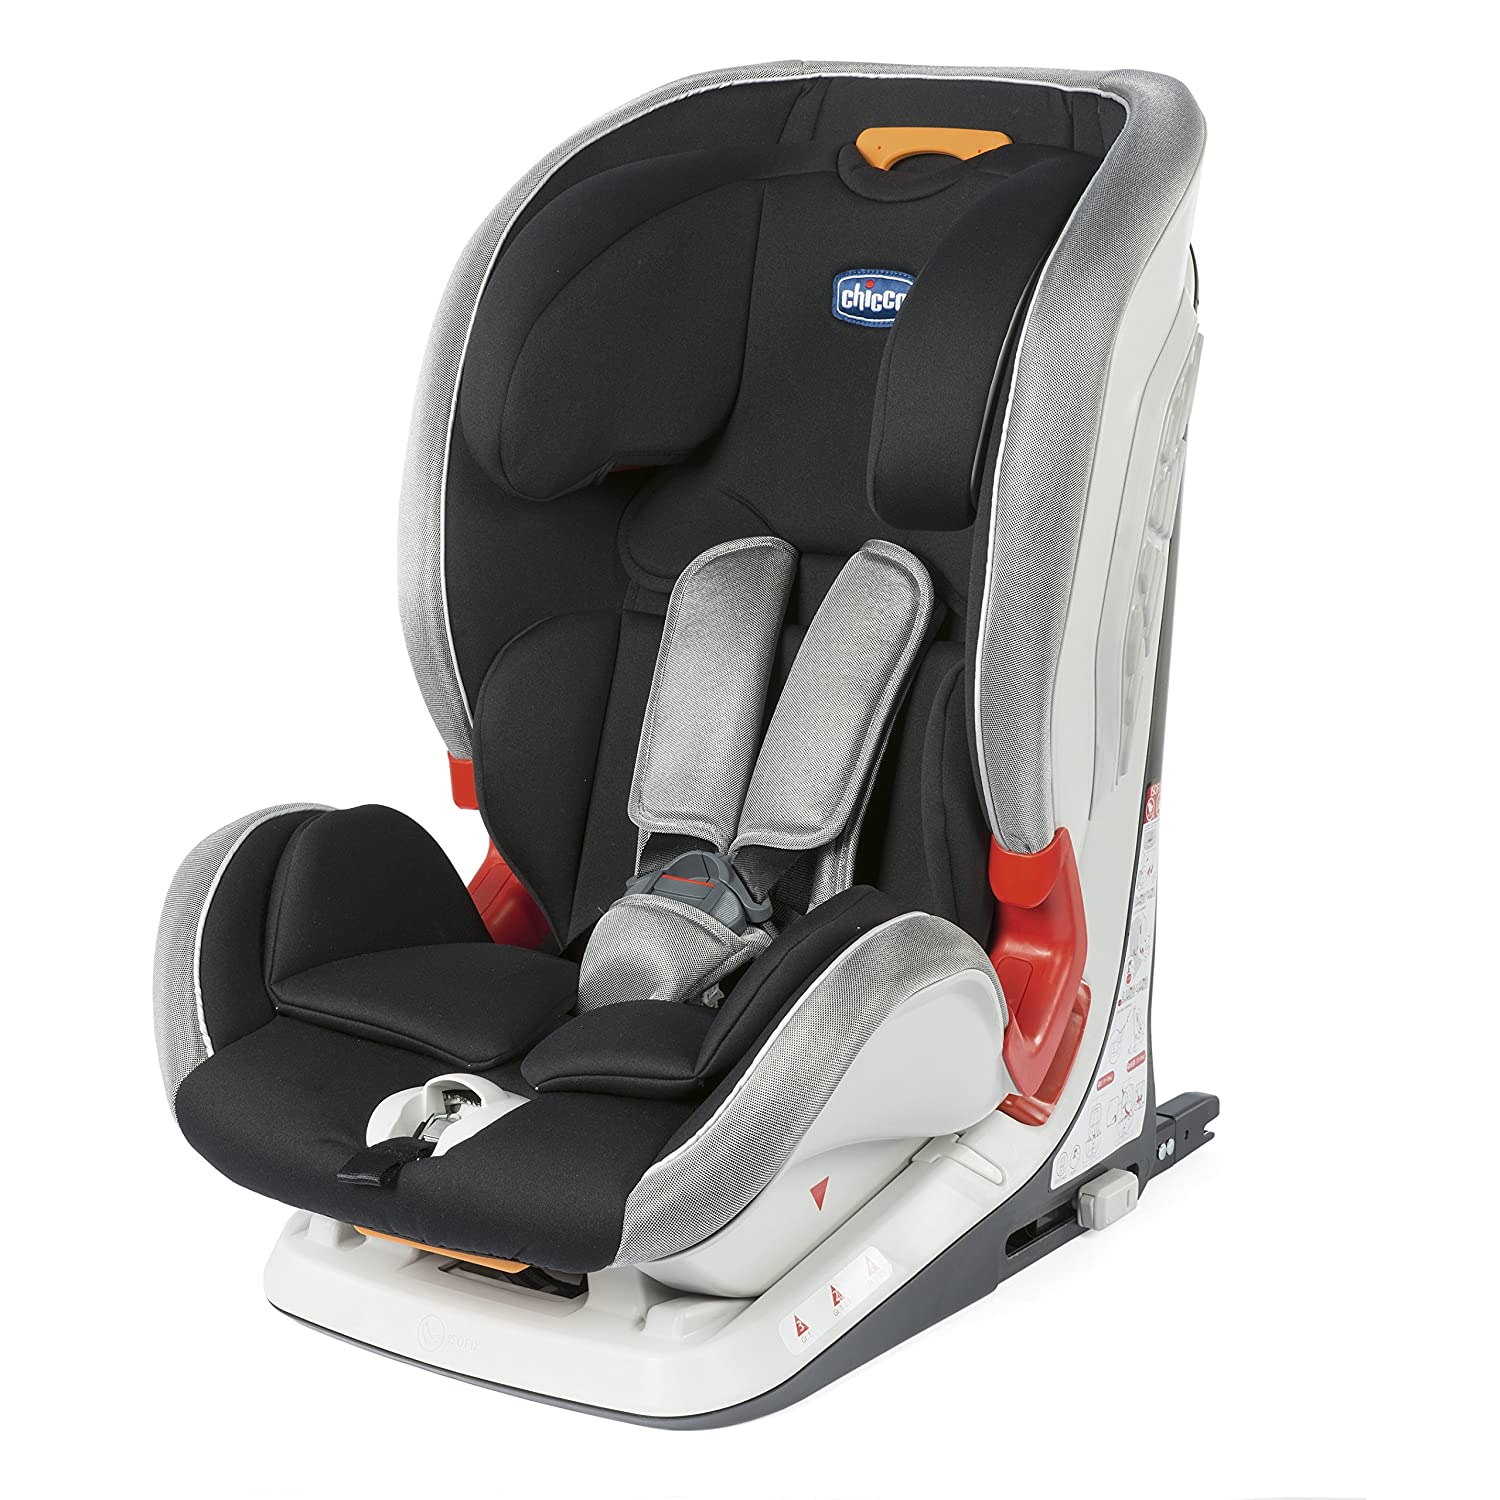 Chicco 00079210310000 Young Iverse Fix Child Car Seat Size 1/2/3 Special Ed